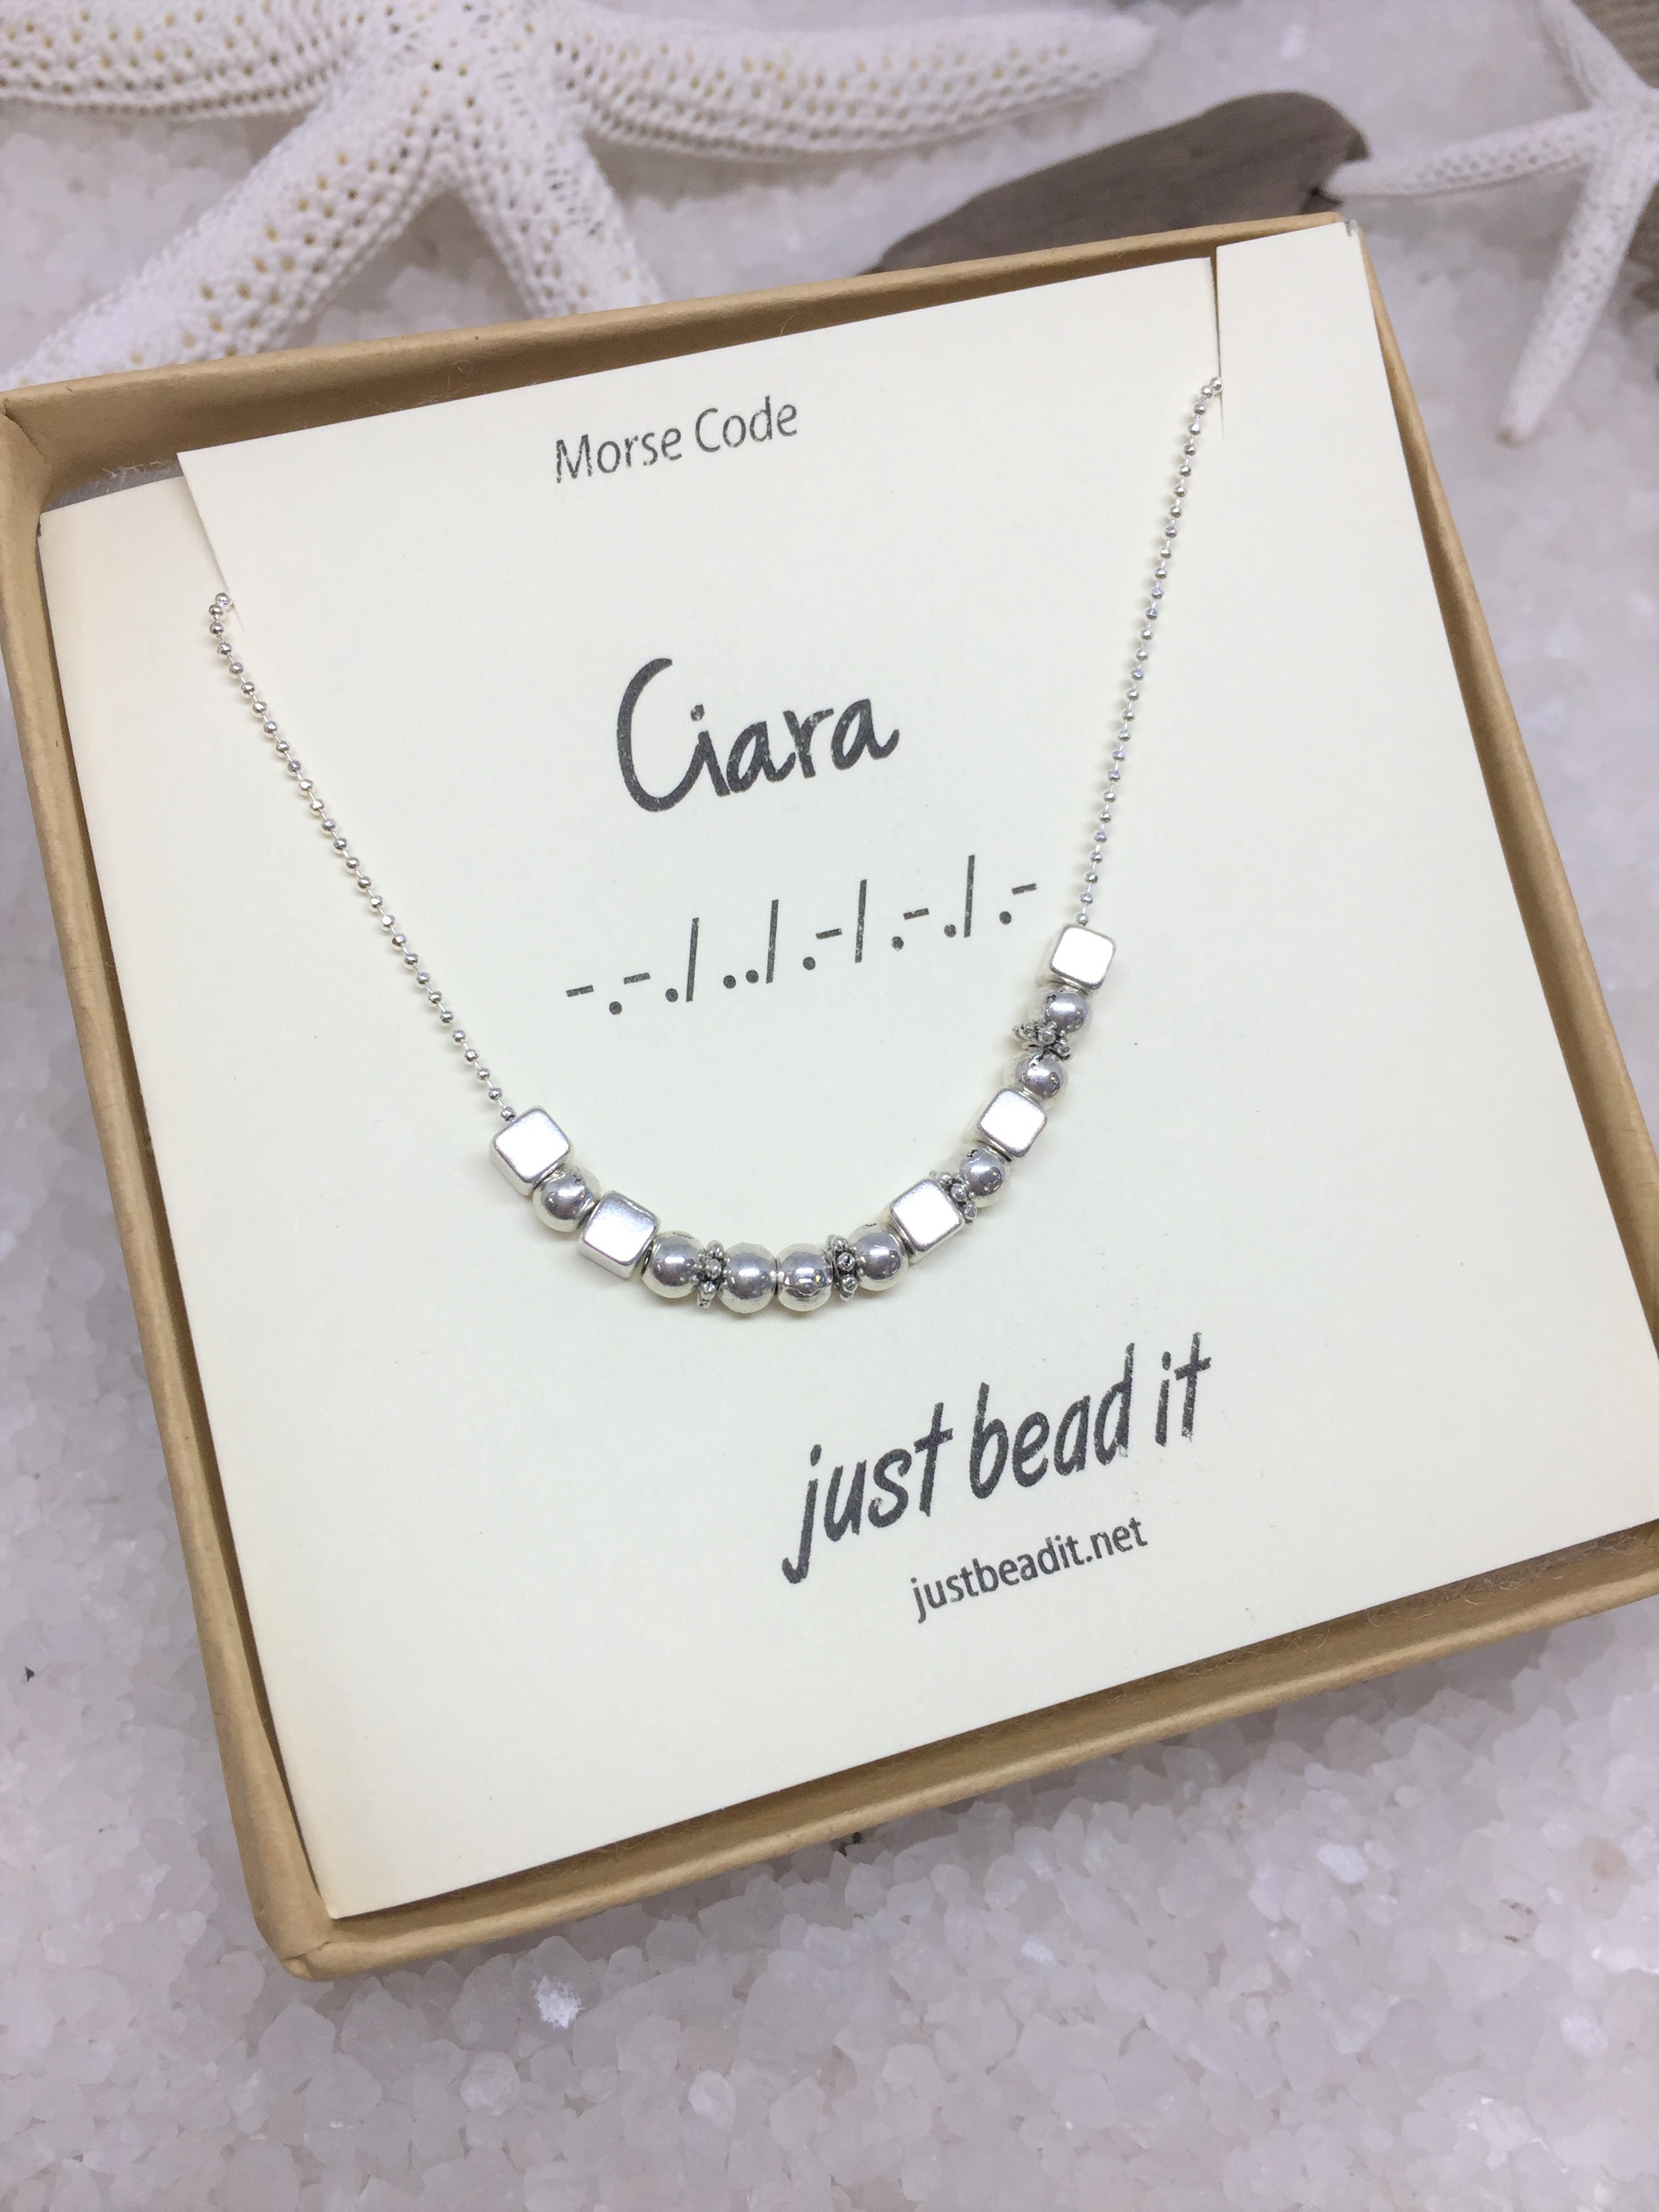 Morse Code Personalized Custom Silver Necklace, Engraved Jewelry, Mens  Necklace, Gift for Him, Gift for Men, Unique Christmas Gifts - Etsy